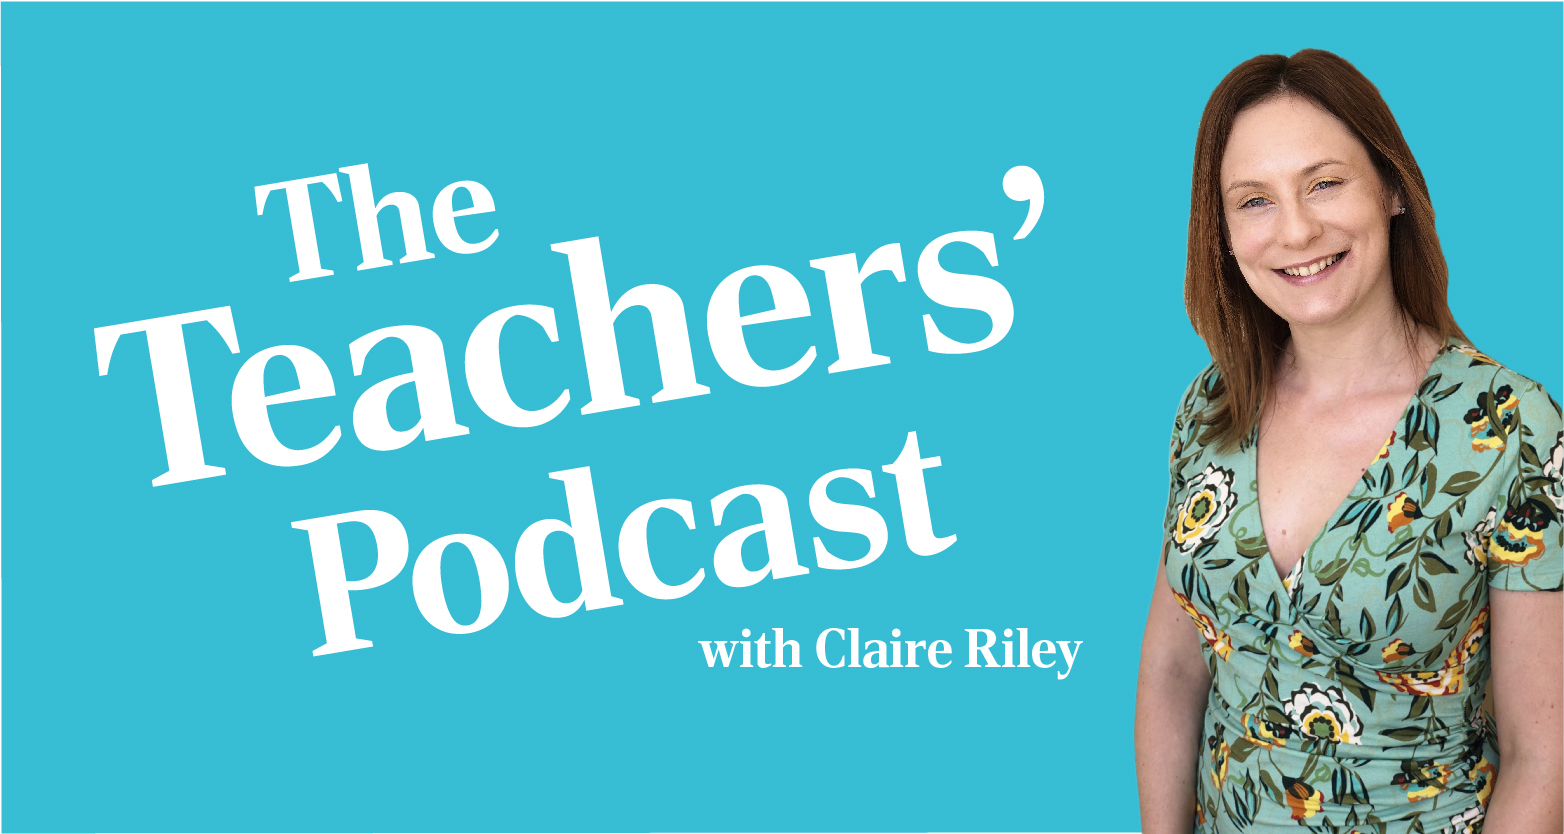 The Teachers’ Podcast is now live!